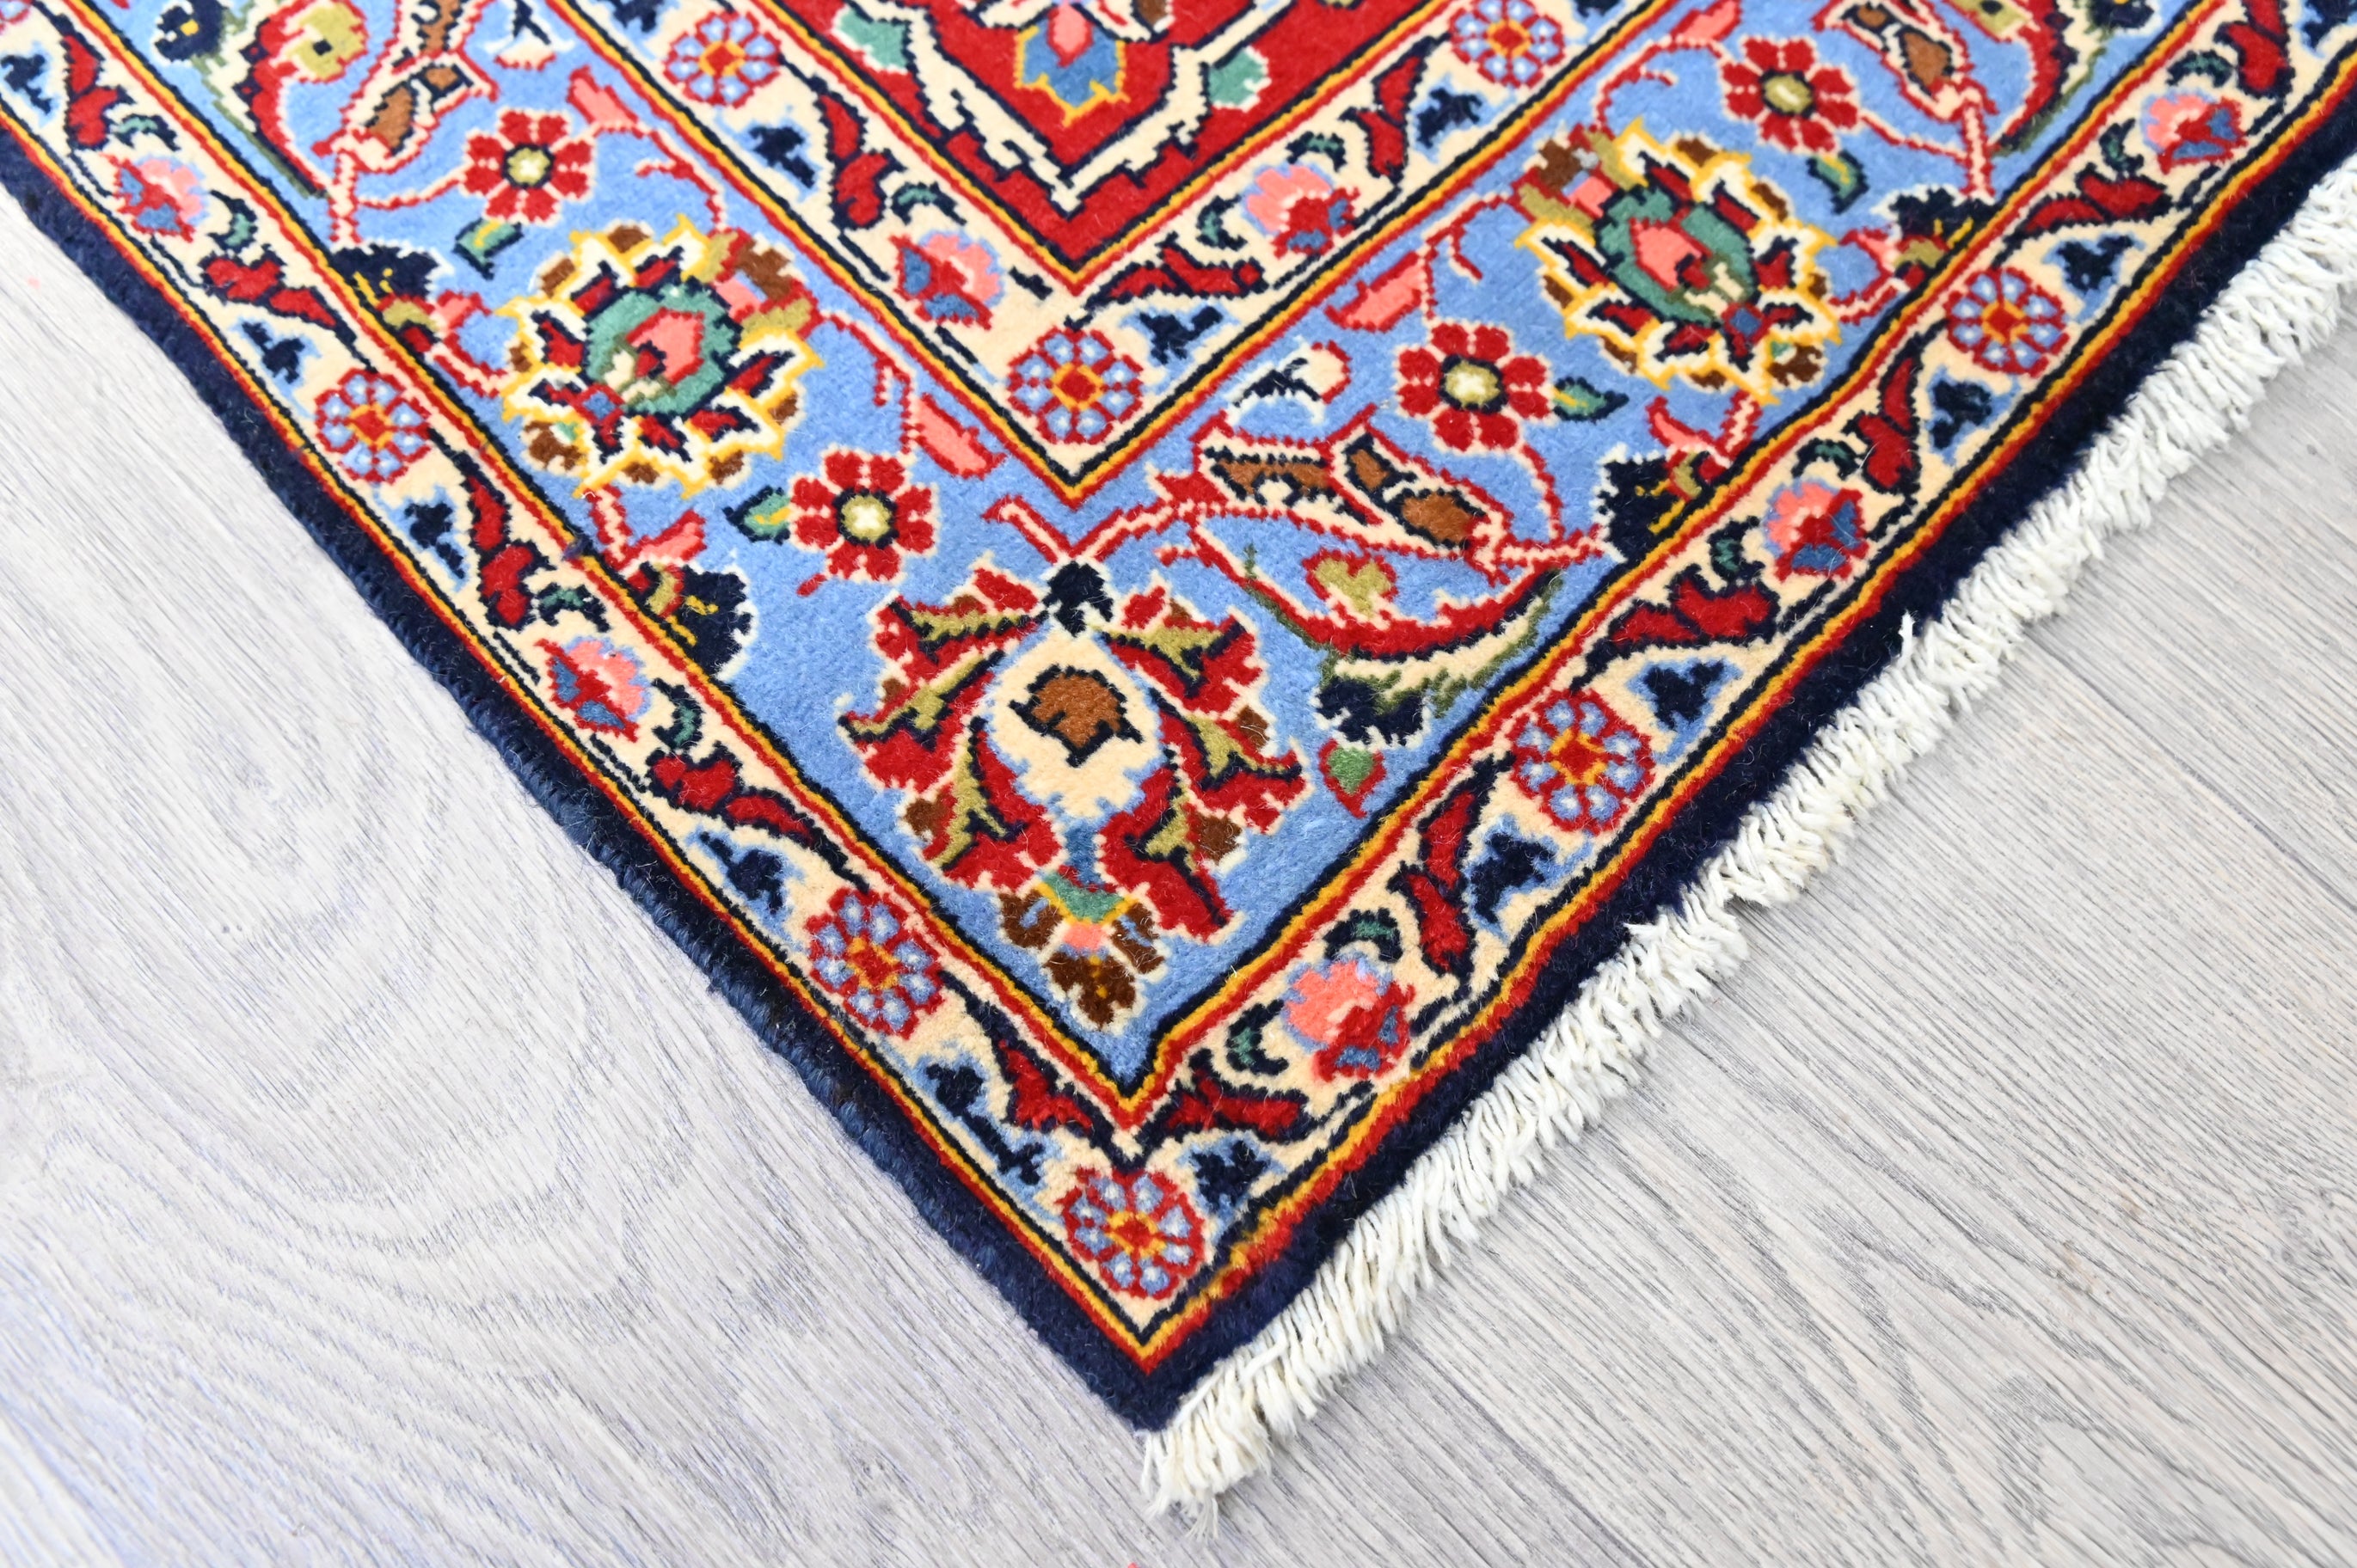 Very Finely Handwoven Thin Pile Woollen Persian Kashan w/ Rare colours of Navy, Deep Red and Blue - 432cm x 300cm